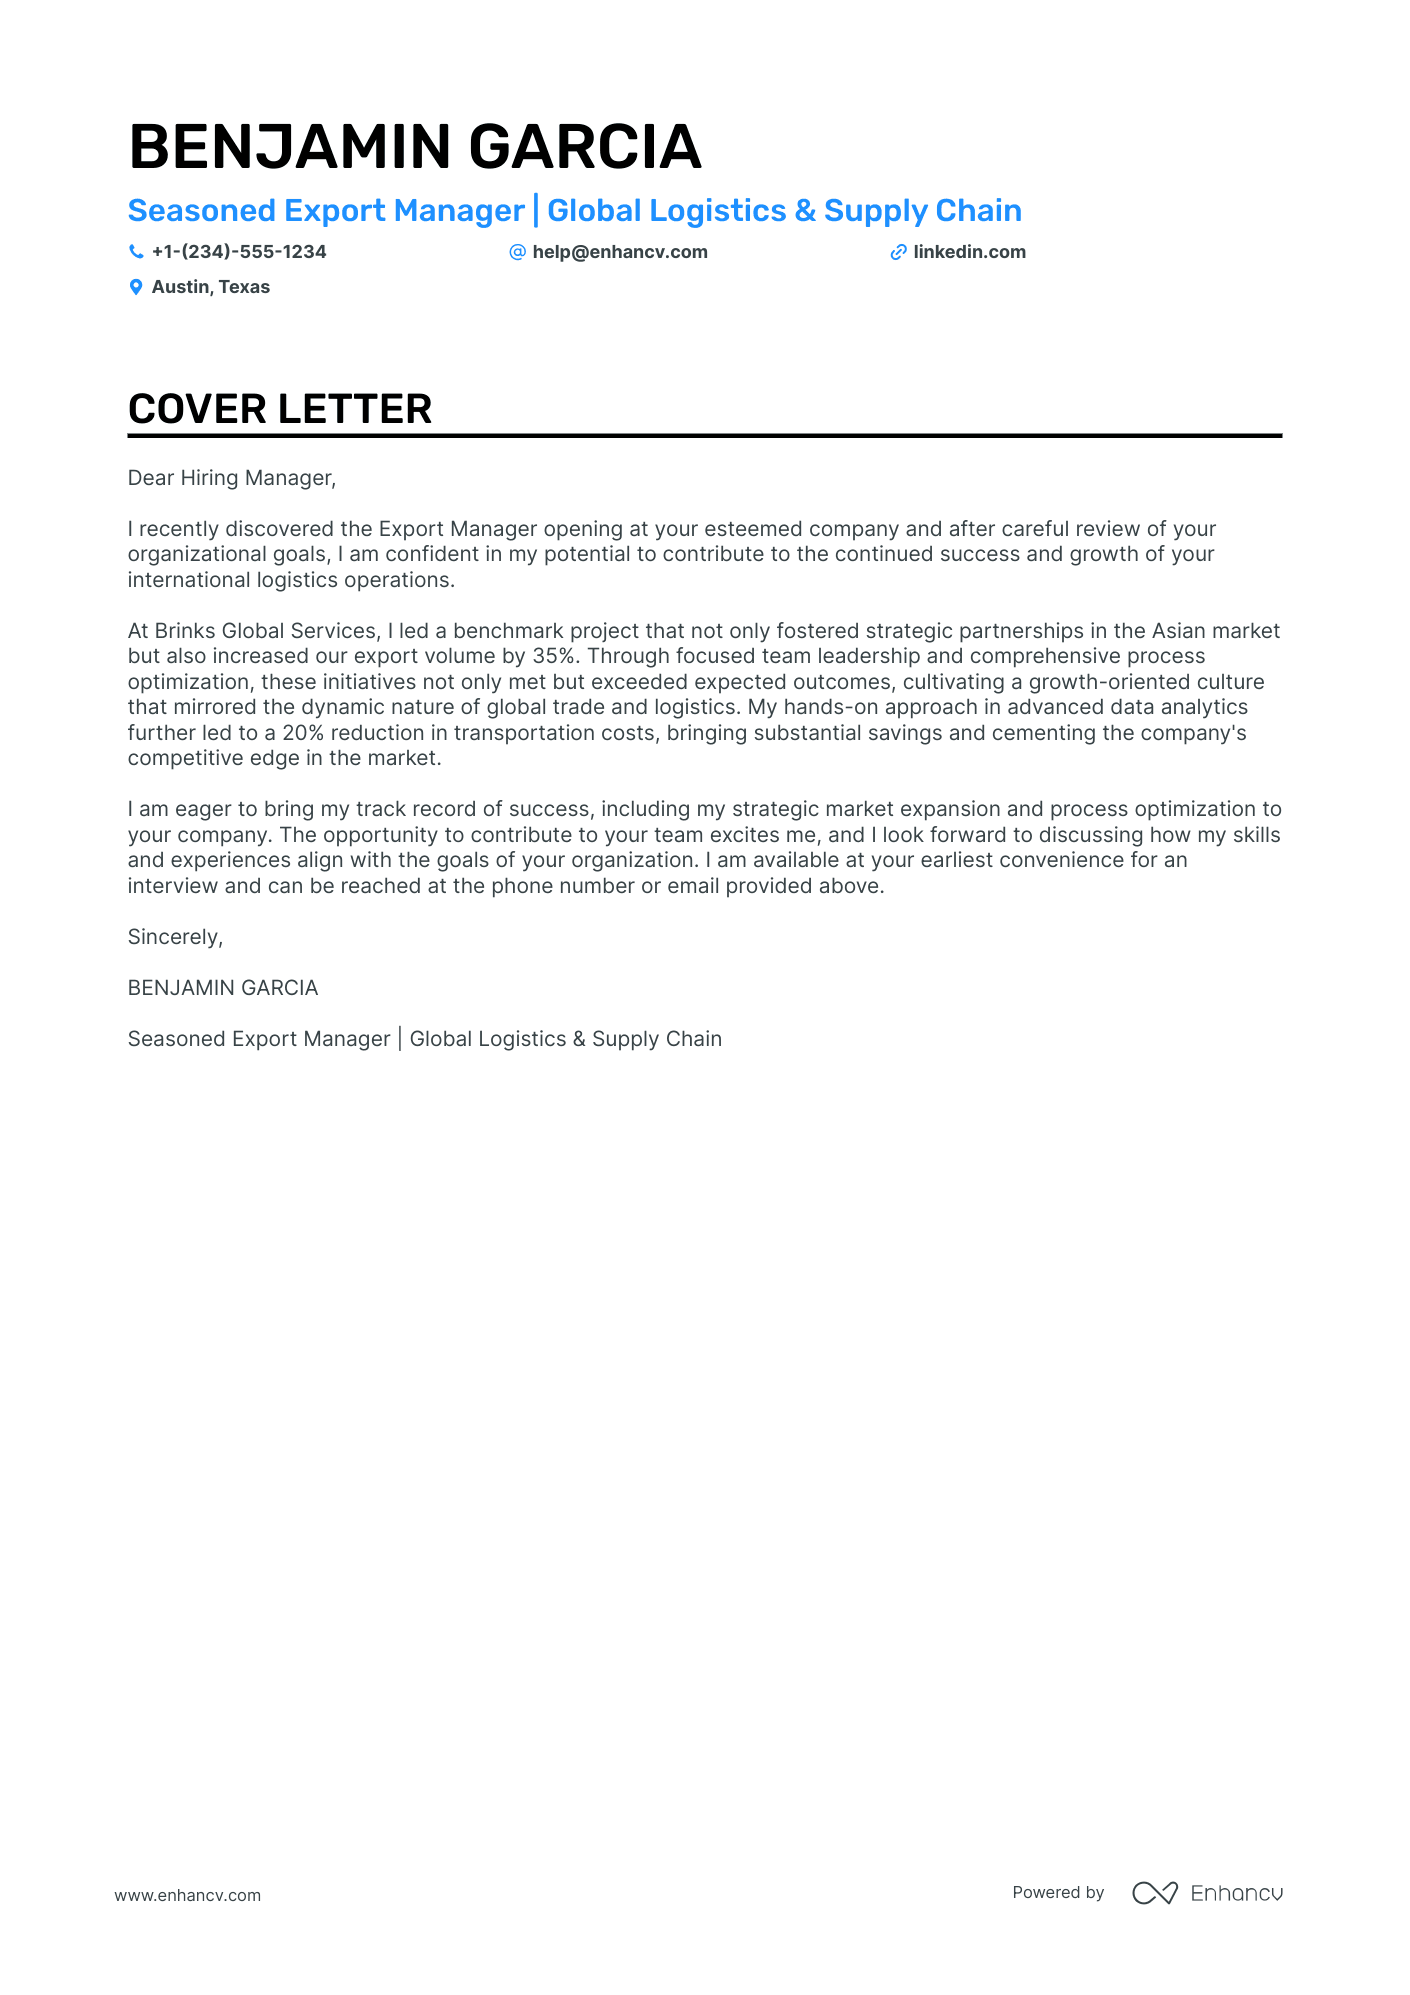 Export Manager cover letter